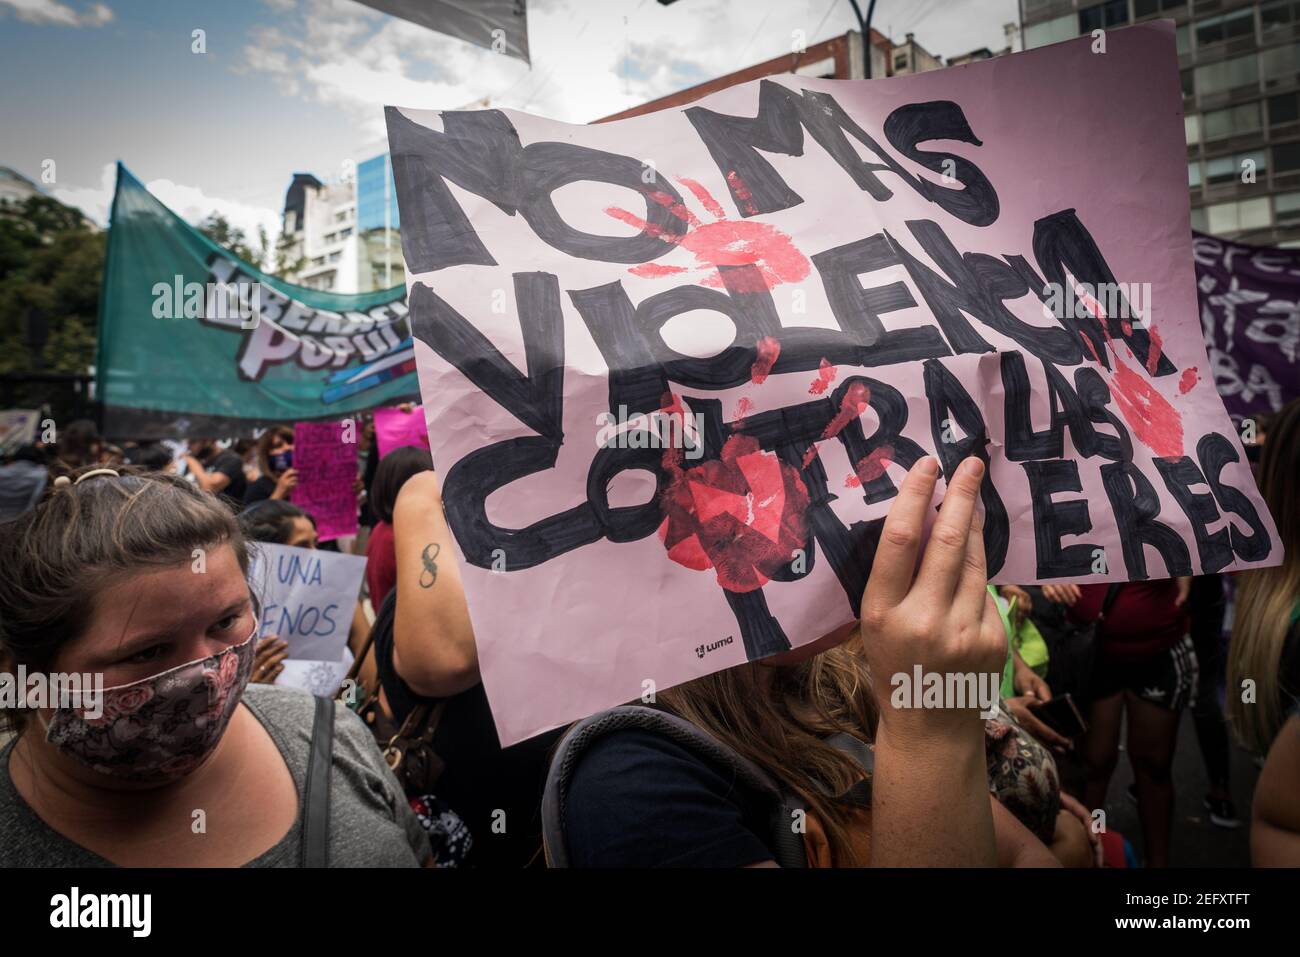 A protester holds a placard expressing her opinion during the demonstration.The feminist movement “ Ni Una Menos” concentrated at the Courthouse in repudiation of the Justice’s reaction, after the femicide of Úrsula perpetrated by Matías Martínez in the town of Rojas, Buenos Aires. Stock Photo